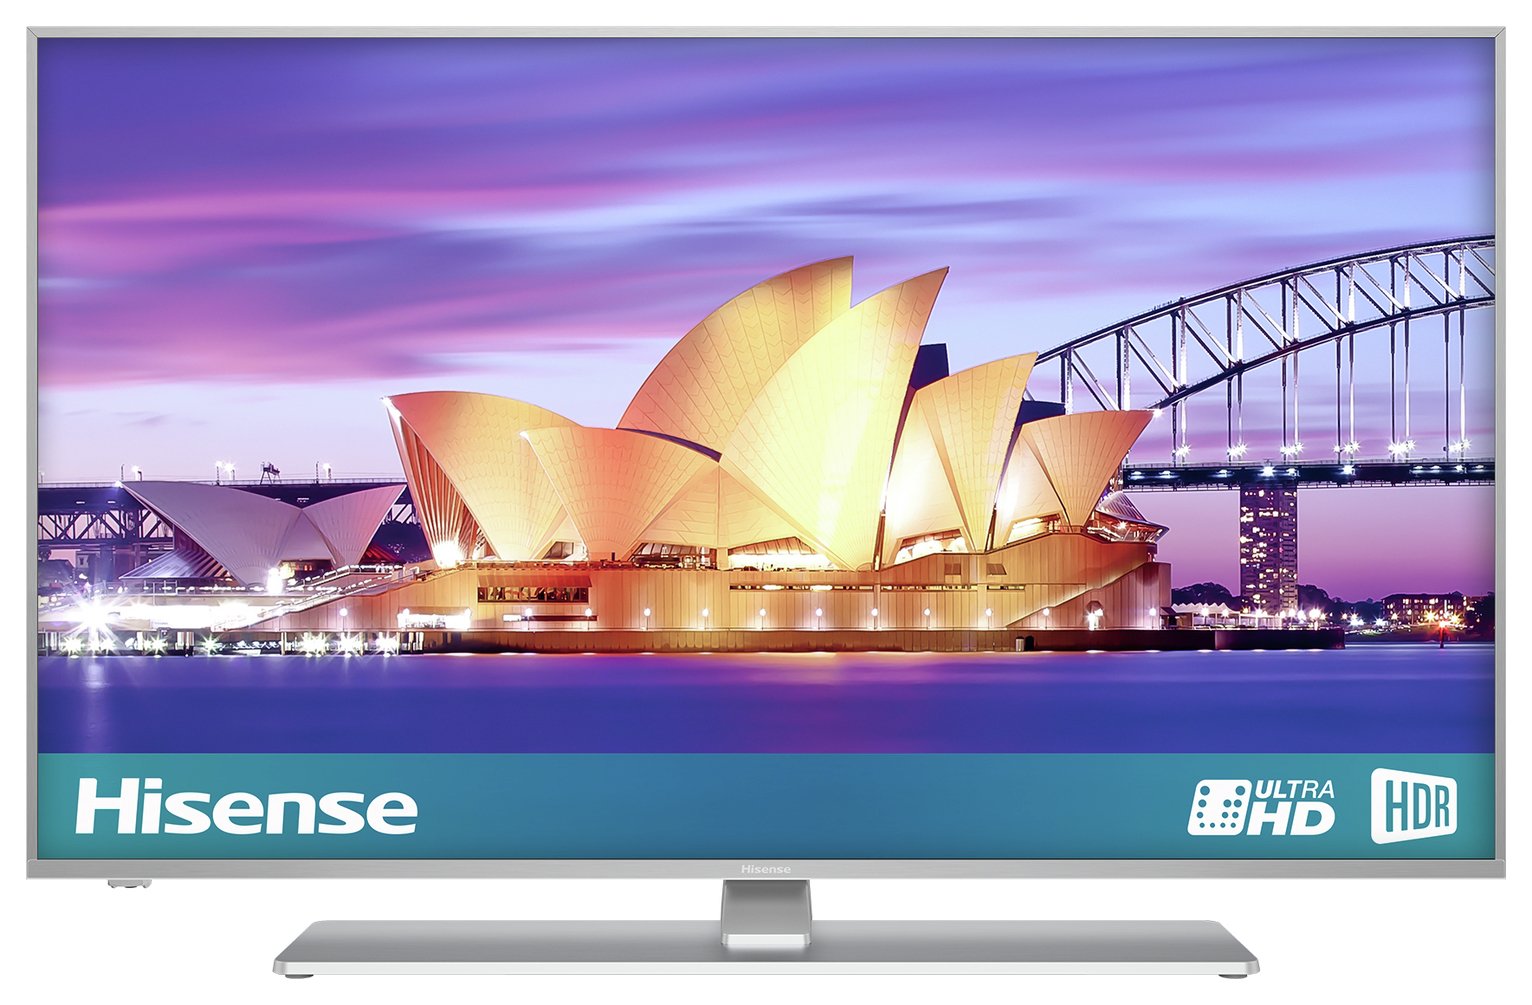 Hisense 50 Inch H50A6550UK Smart UHD TV With HDR review